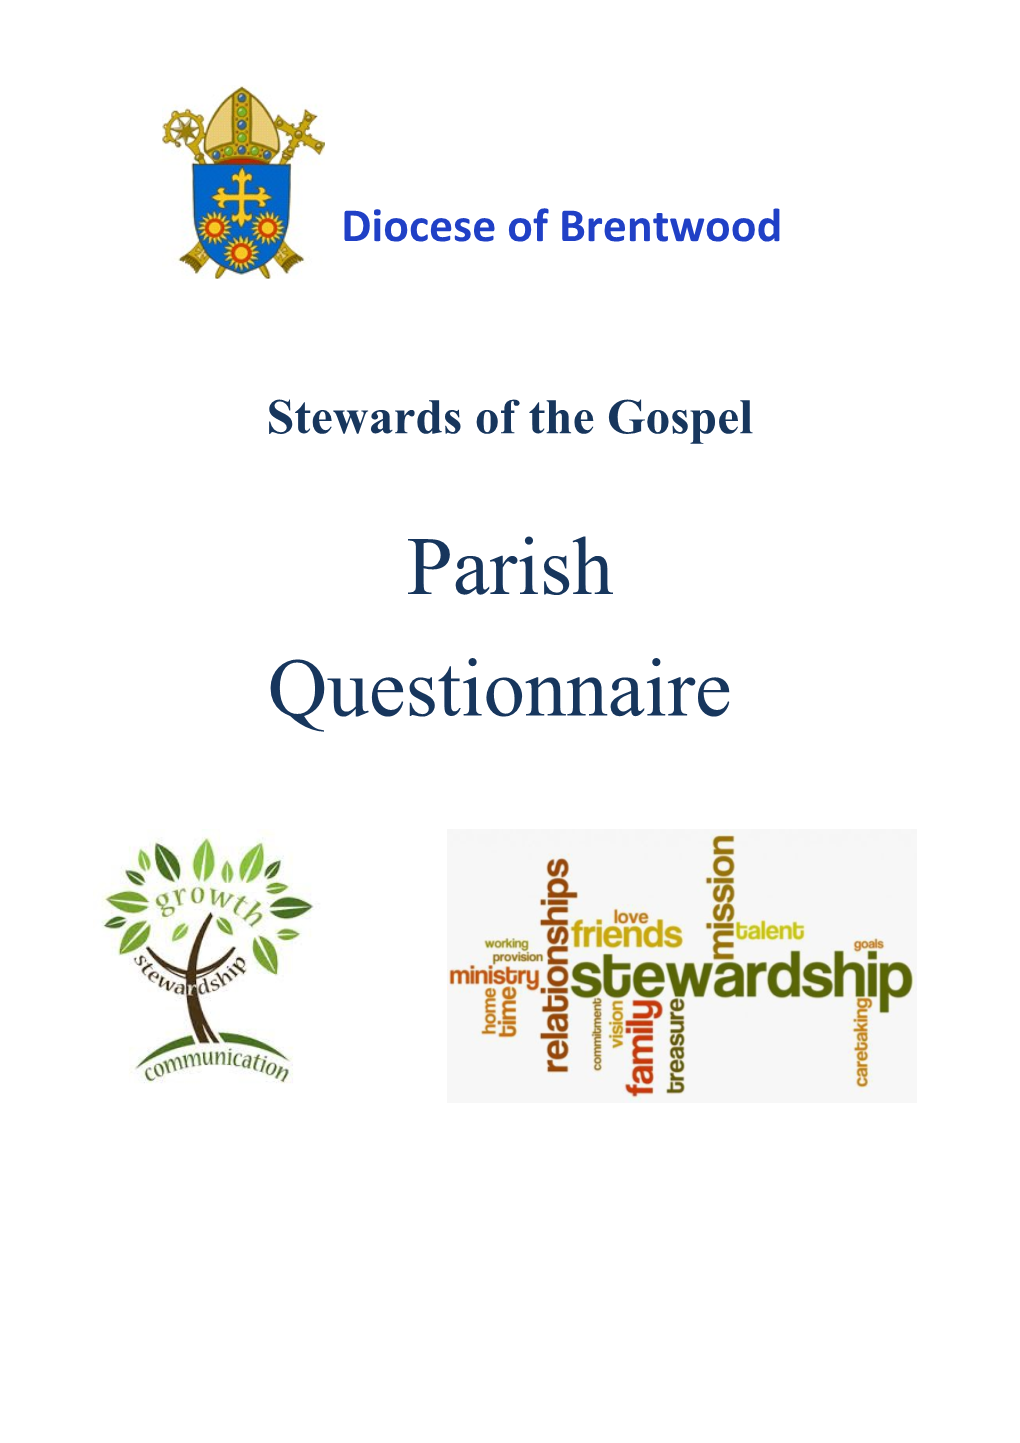 Diocese of Brentwood